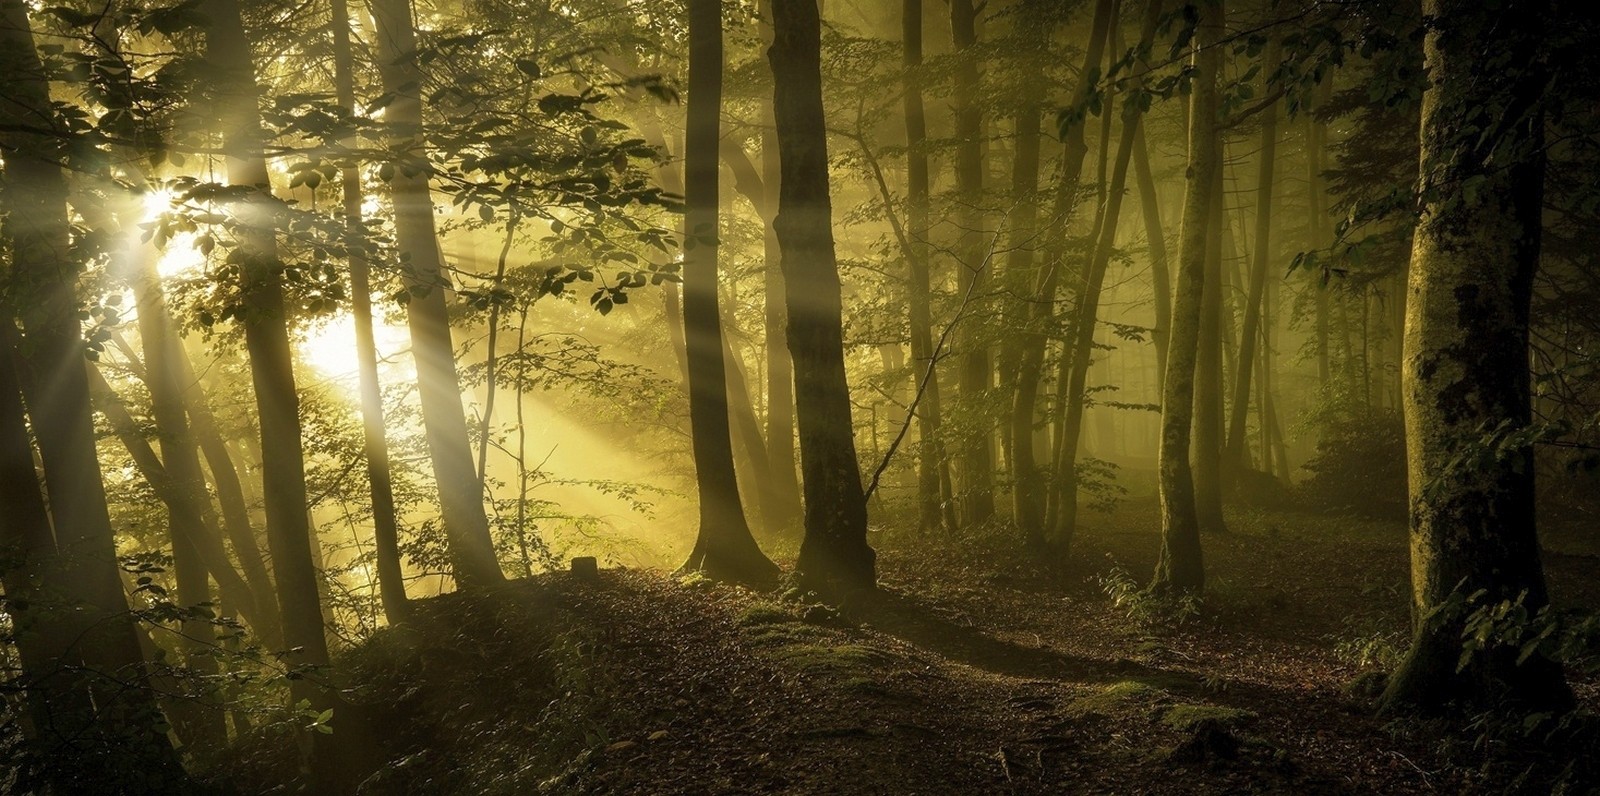 General 1600x796 sunbeams forest path trees mist sunlight leaves nature plants outdoors